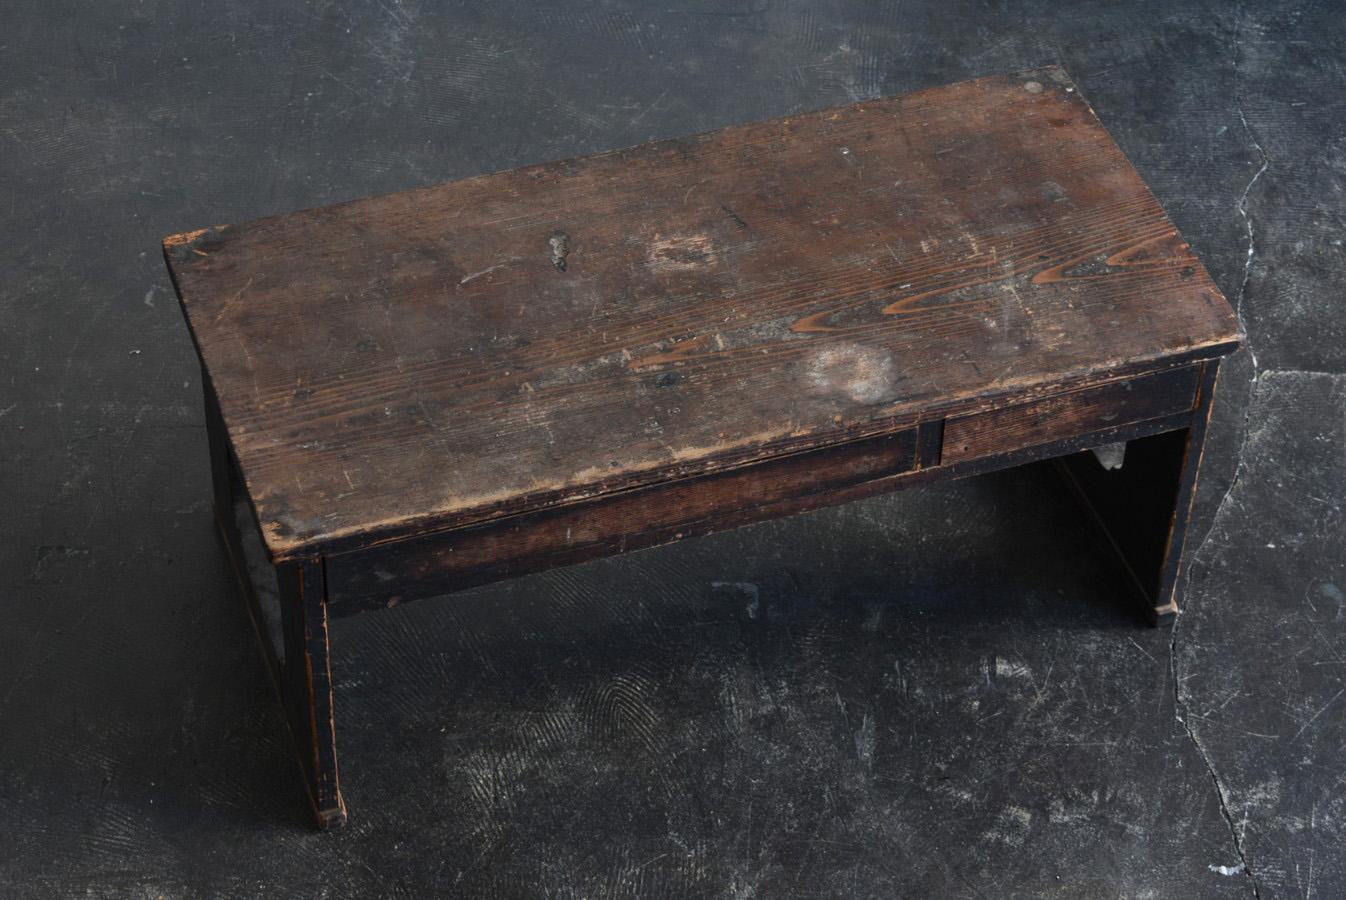 This is an old Japanese study desk or a desk table used in shops.

In Japan, low tables like this used to be used for sitting because of the tatami room culture.

There are various table designs.
This is a table with a slightly unusual